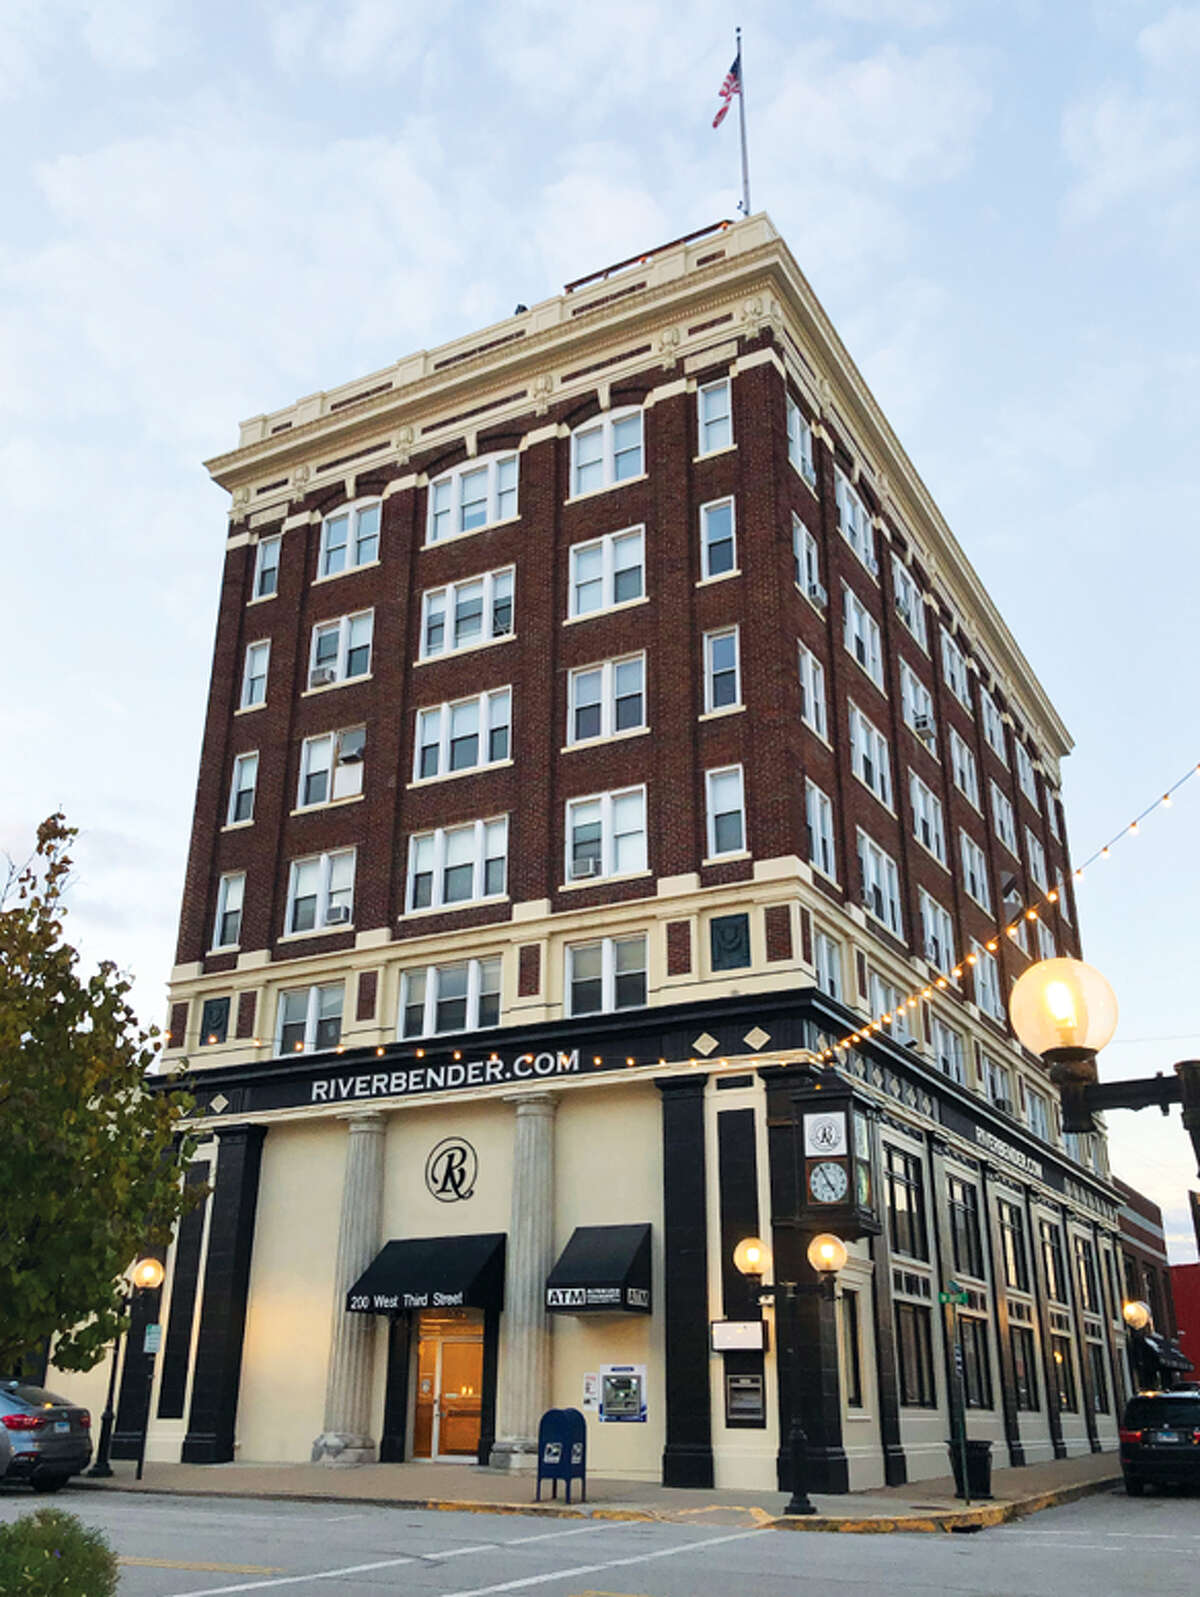 Tenants are being sought for renovated office suites at the Riverbender Building at 200 W. 3rd St. in Alton. The building was bought in July 2021 by Diversified Real Estate Group of Clayton, Missouri.